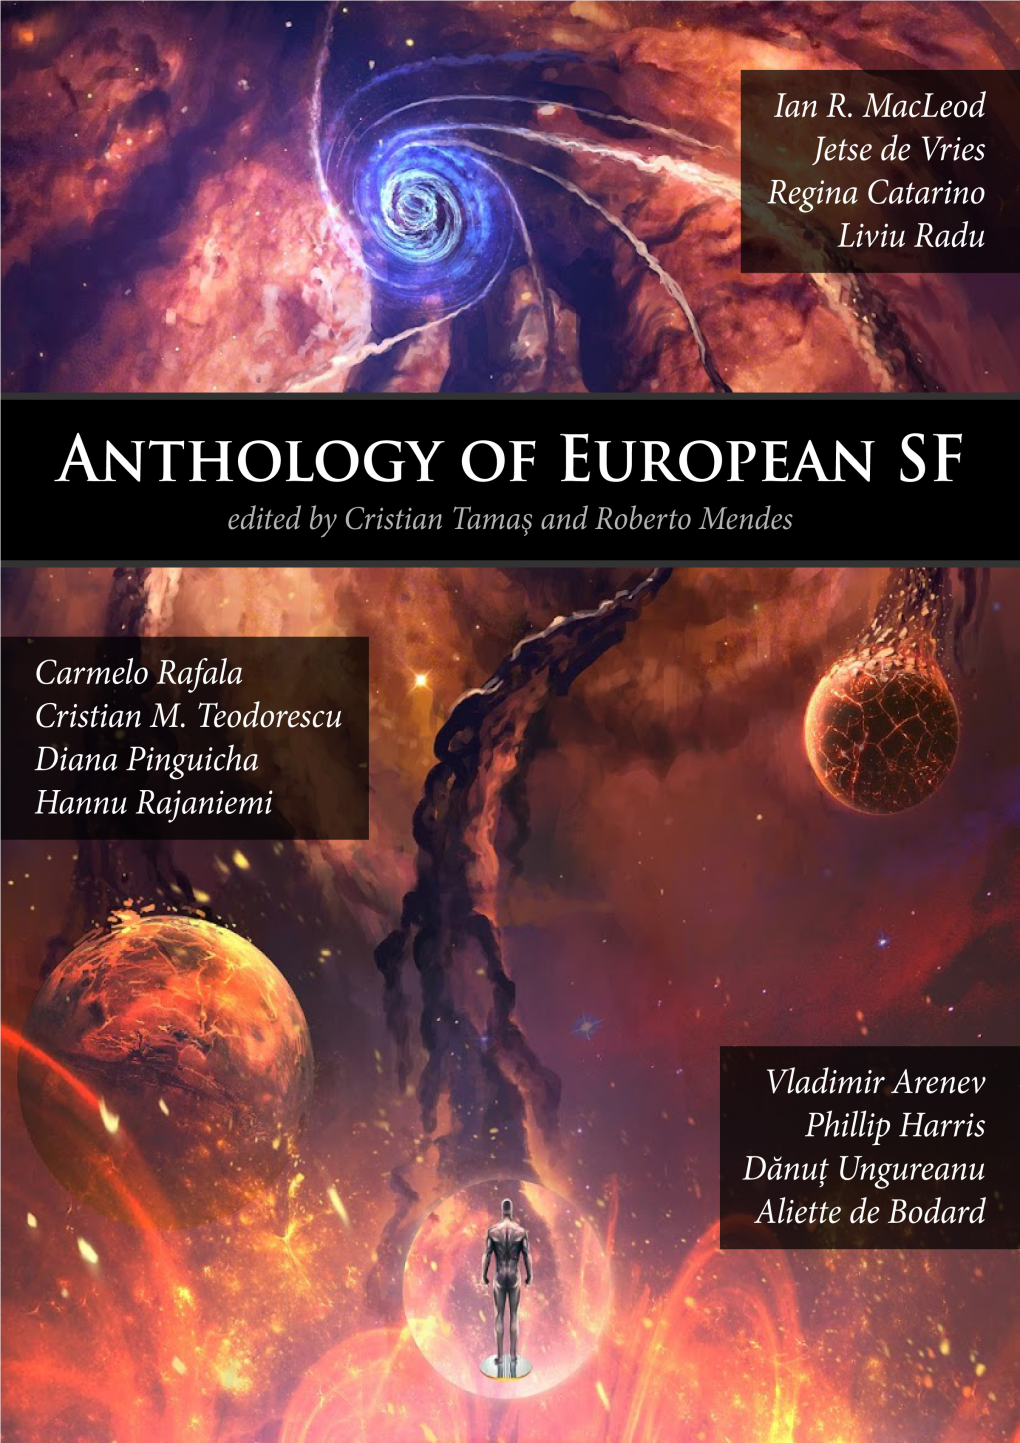 Anthology of European Speculative Fiction